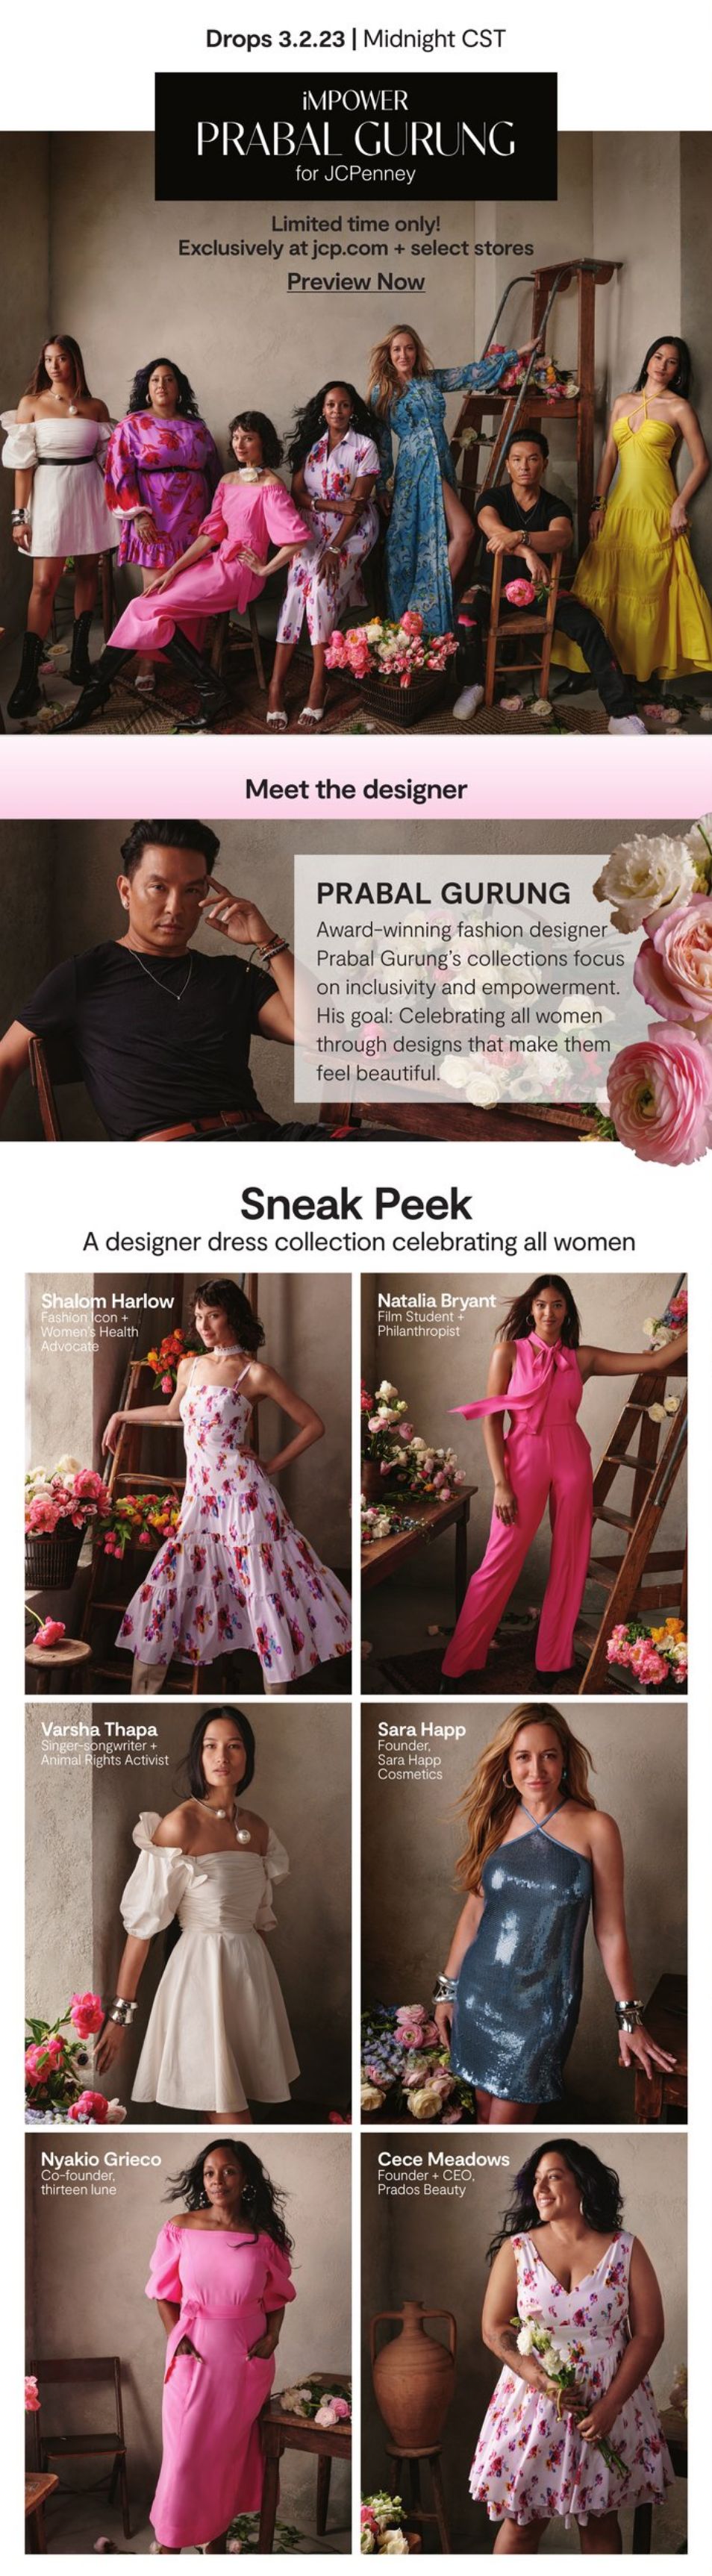 Weekly ad JC Penney 02/21/2023 - 02/26/2023